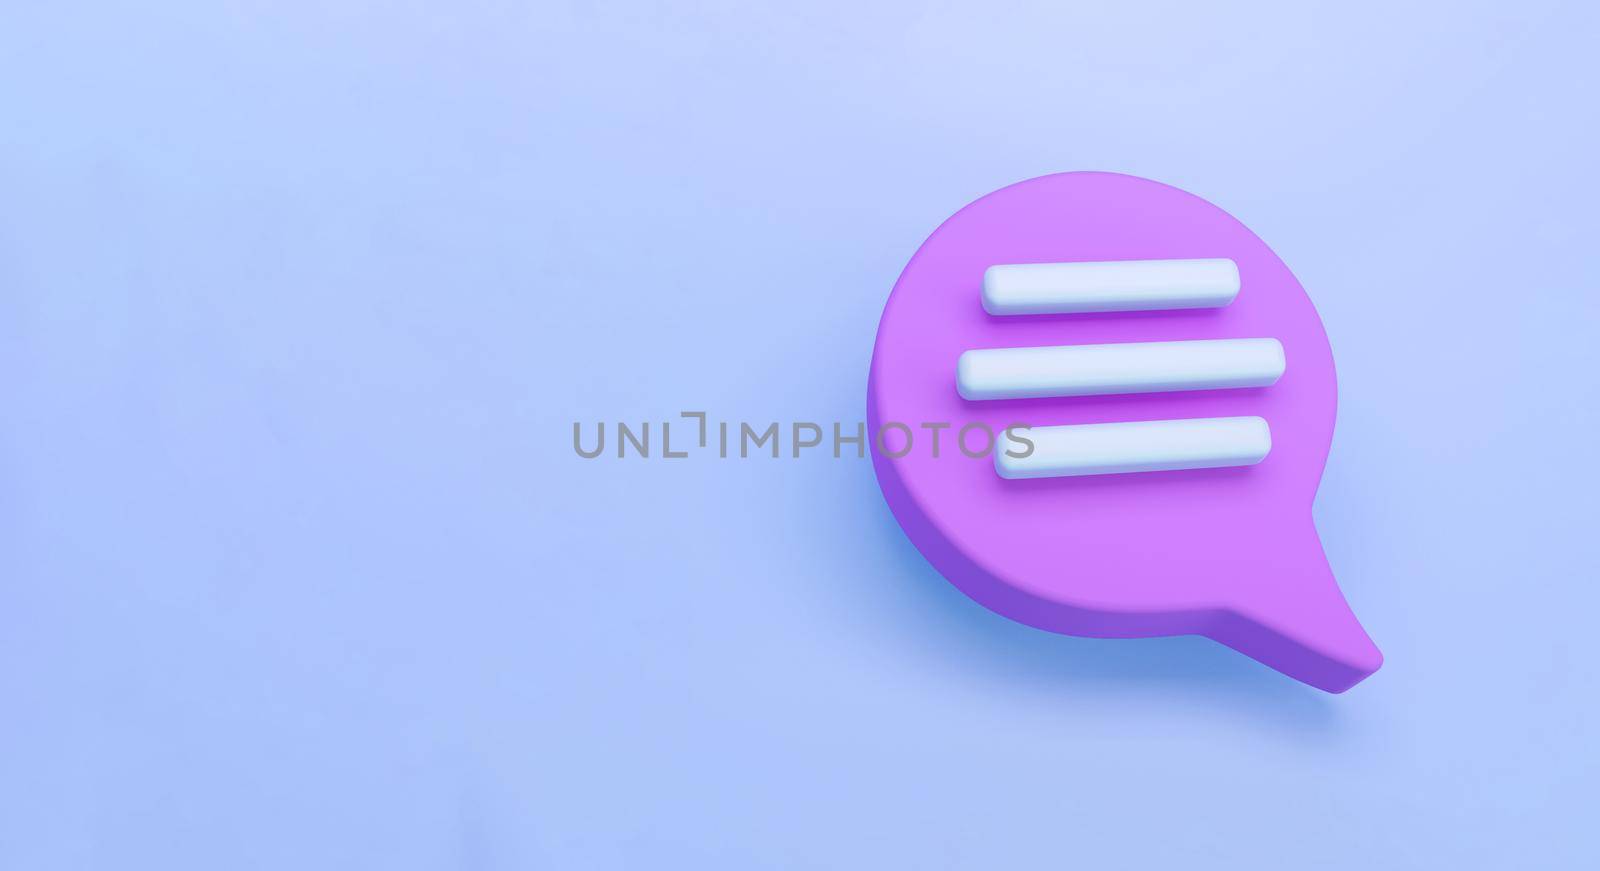 3d purple Speech bubble chat icon isolated on blue background. Message creative concept with copy space for text. Communication or comment chat symbol. Minimalism concept. 3d illustration render